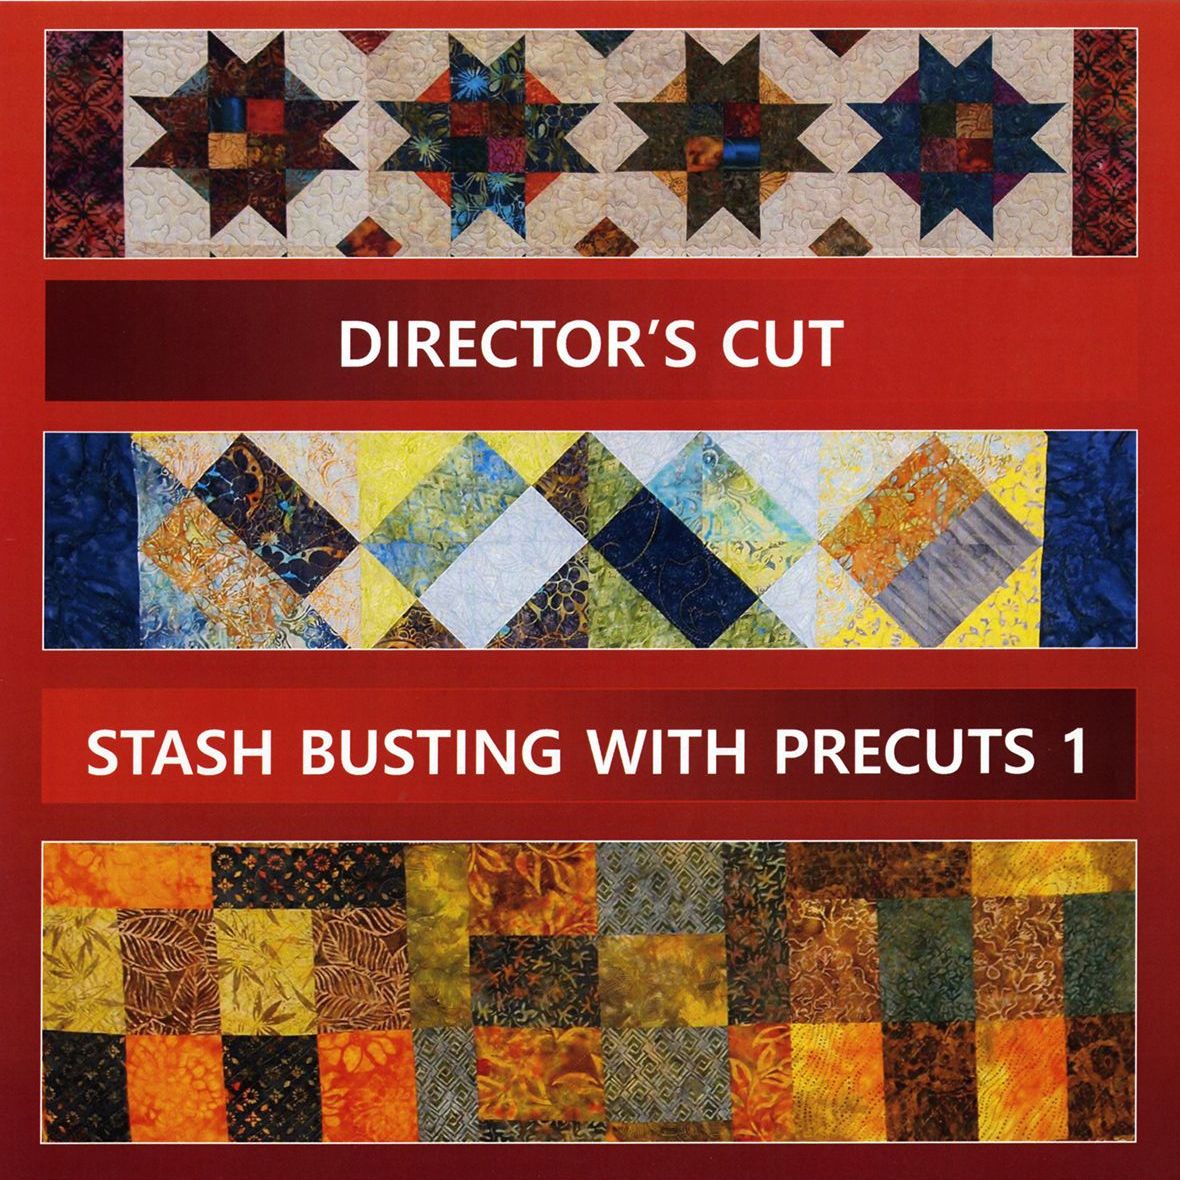 Director's Cut Quilt Pattern Book by Marlous Carter for Marlous Designs